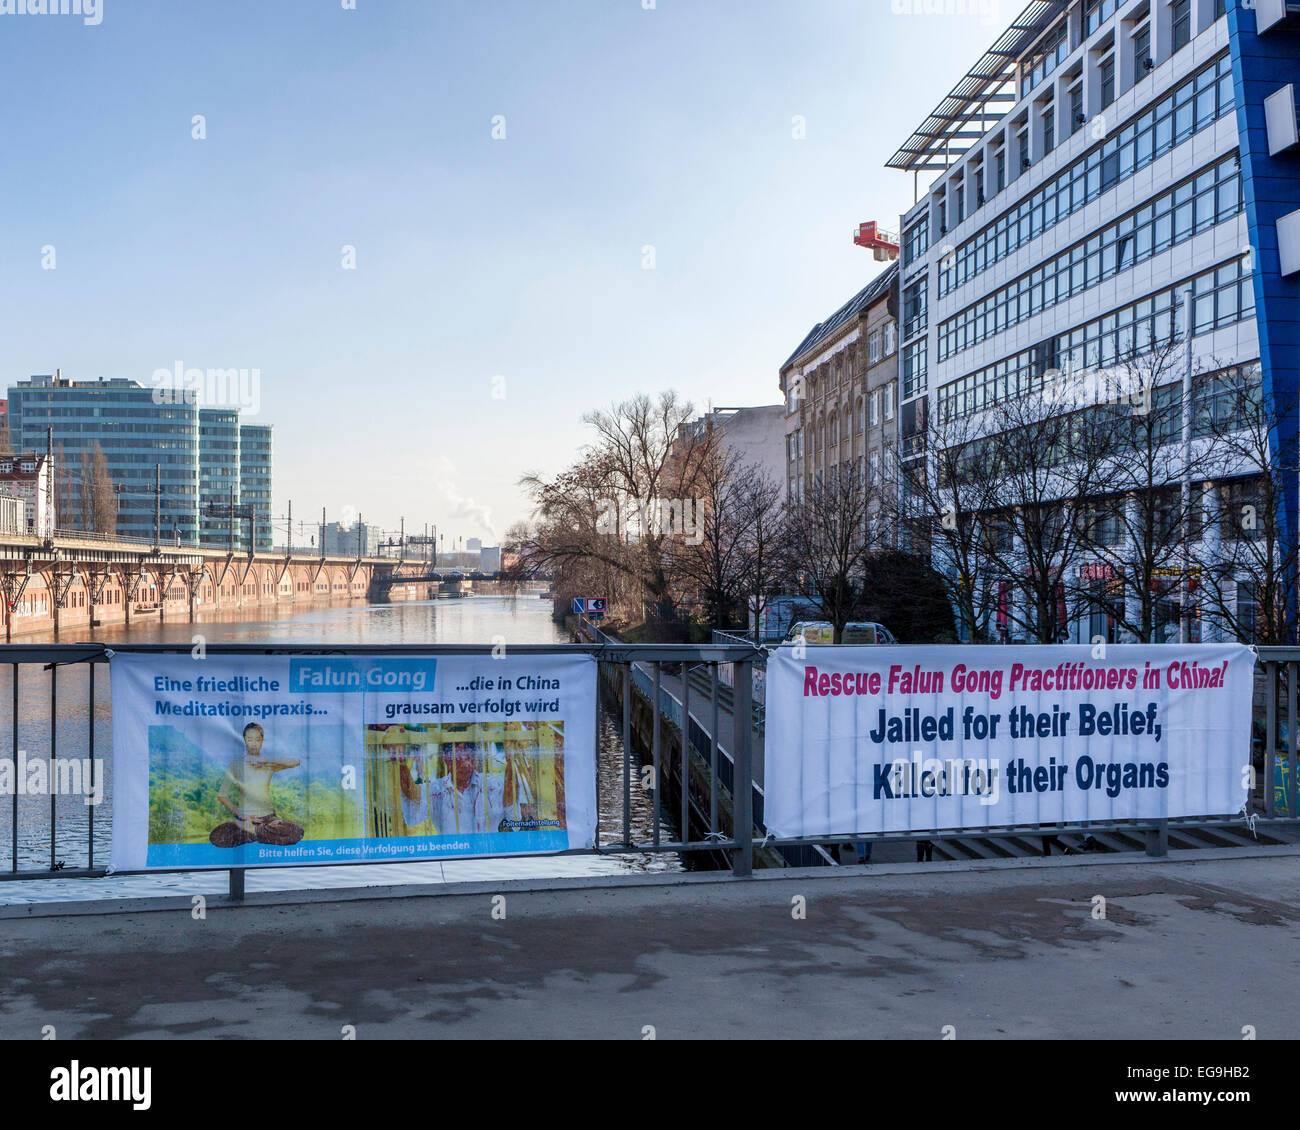 Germany, Berlin, 19th February 2015. Protesters on the Jannowitzbrücke opposite the Chinese Embassy display banners protesting the treatment of Falun Gong practitioners in China. It is alleged that followers of the self-improvement regime are subjected to extreme torture, their organs are harvested for profit and that there have been nearly 4000 reported deaths. Credit:  Eden Breitz/Alamy Live News Stock Photo